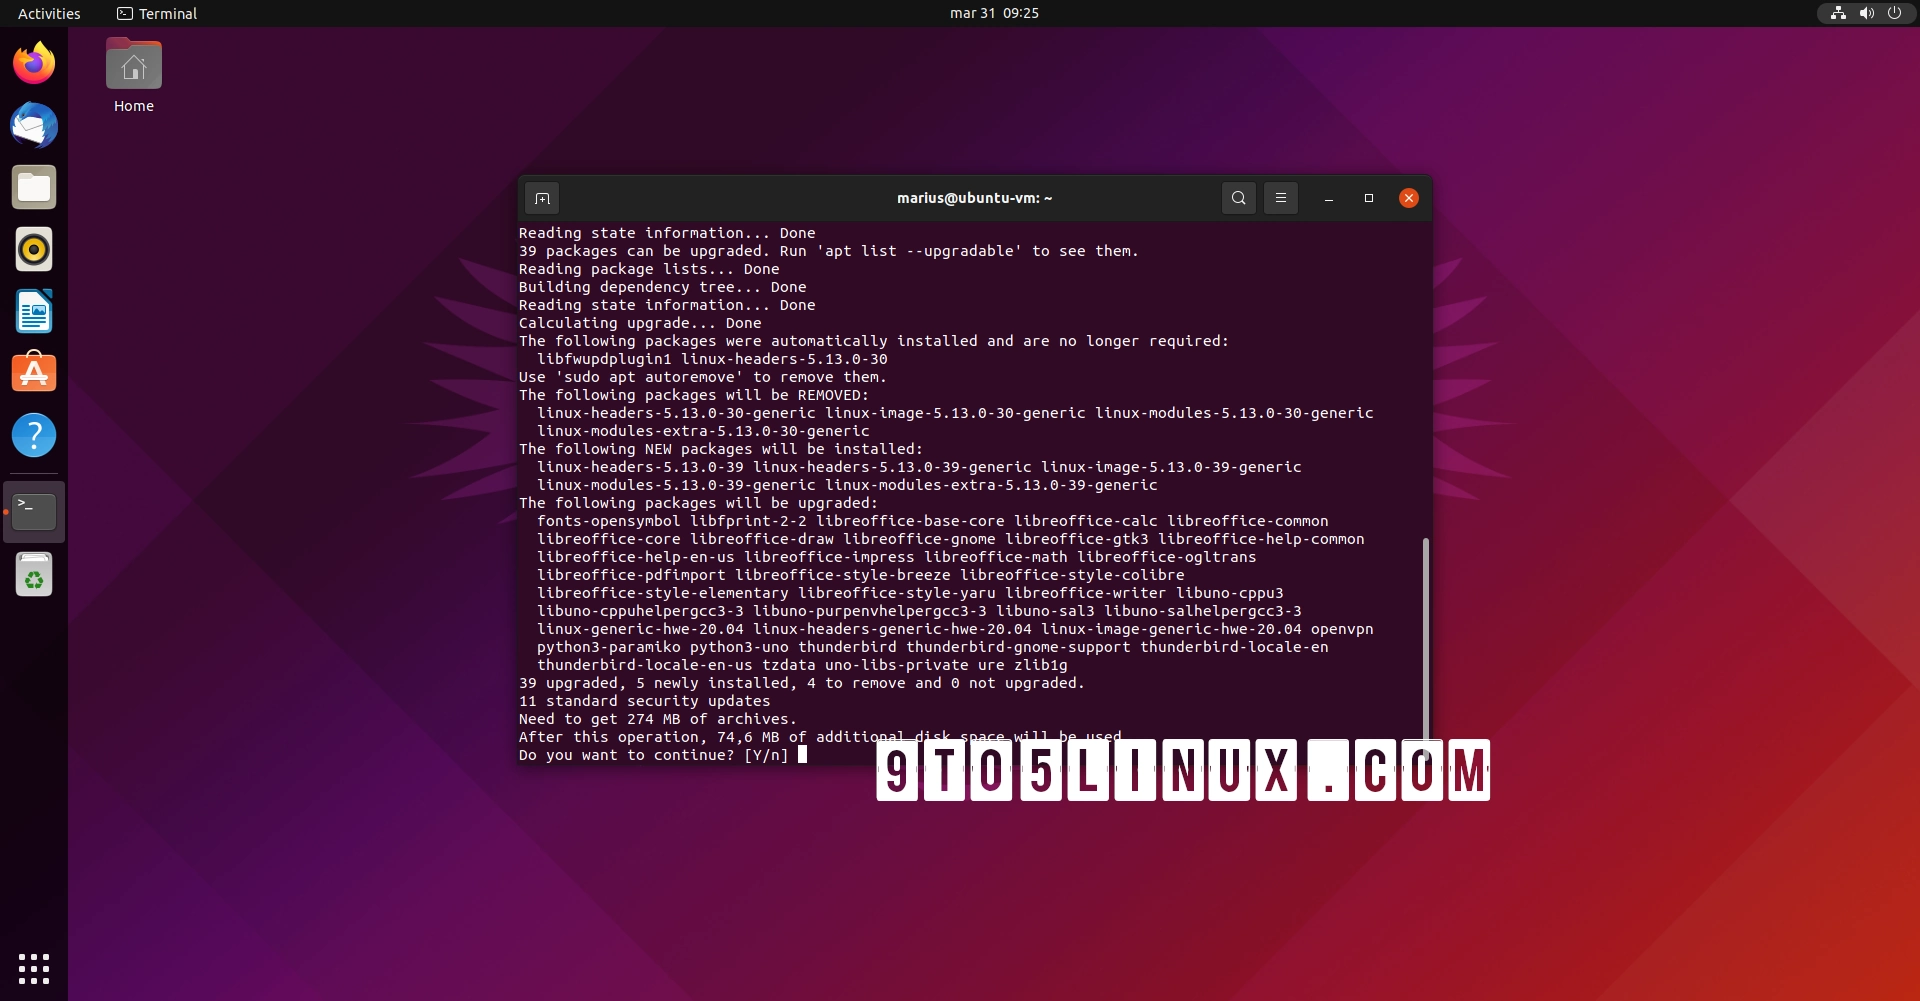 Ubuntu Users Get Small Linux Kernel Security Update with Only Two Flaws Patched